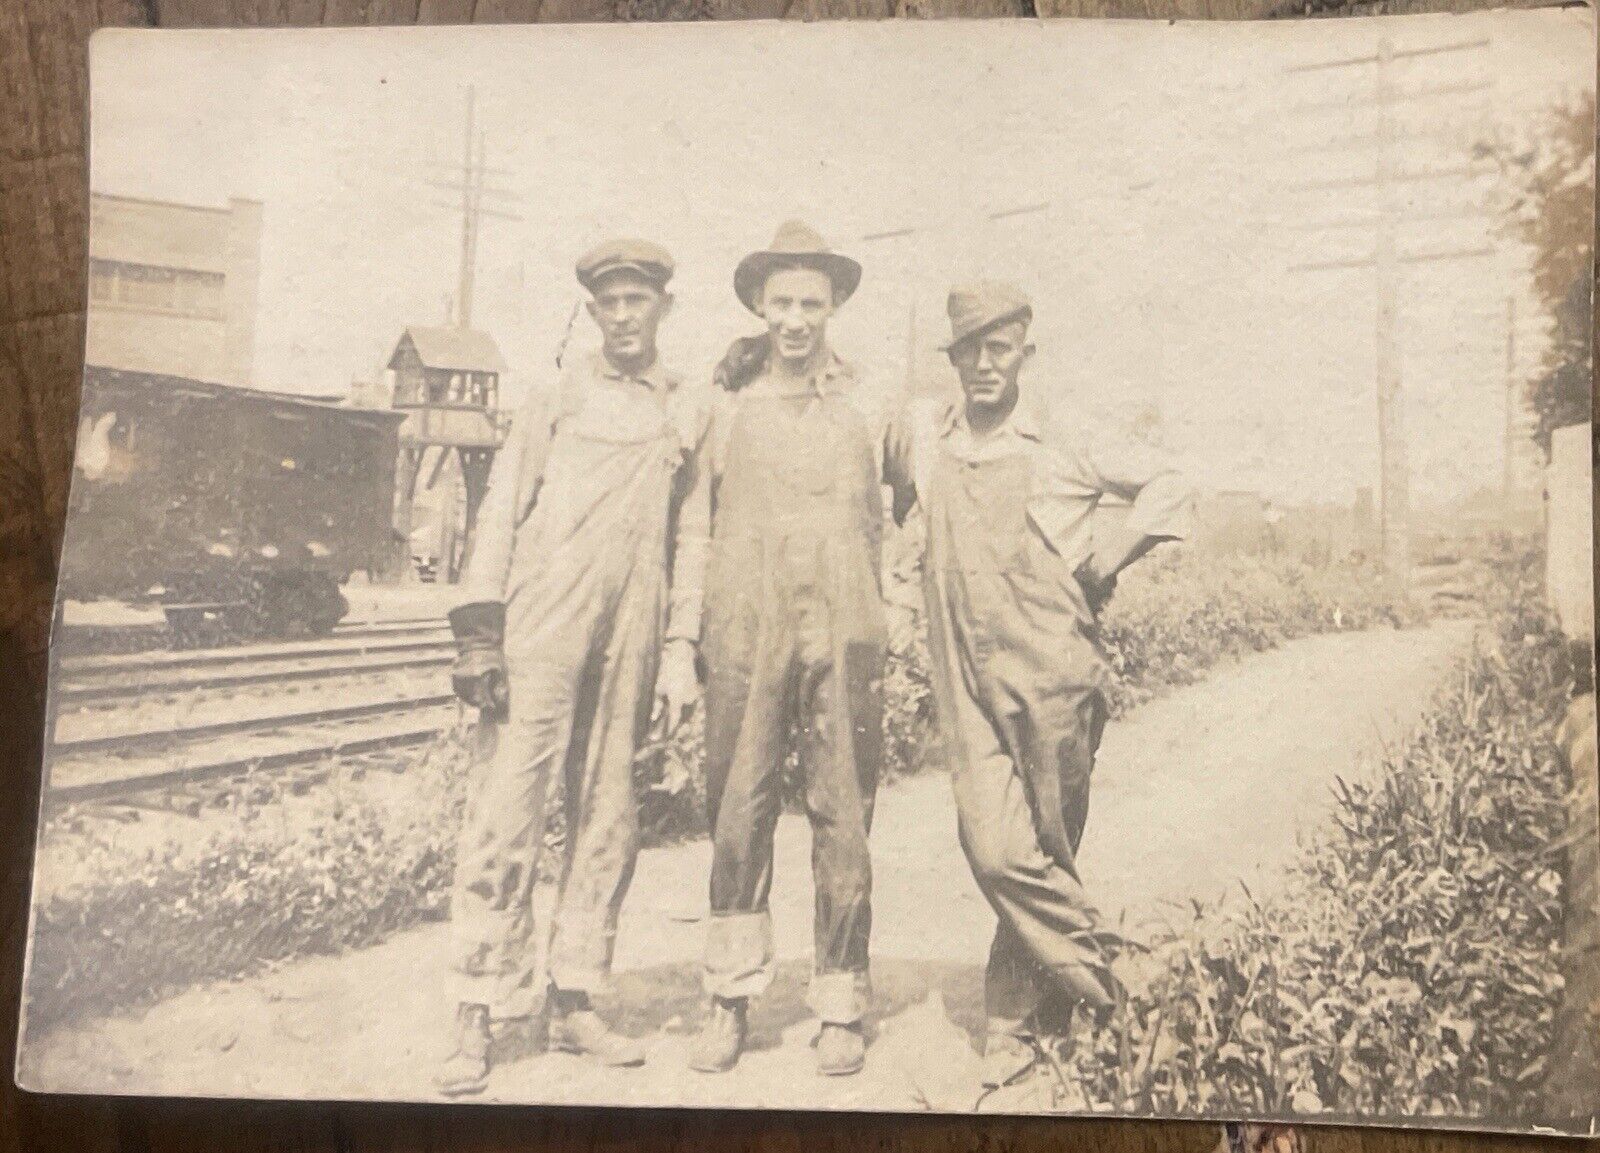 Three Men Arms Around Each Other Railroad Workers Snapshot Photo Occupational